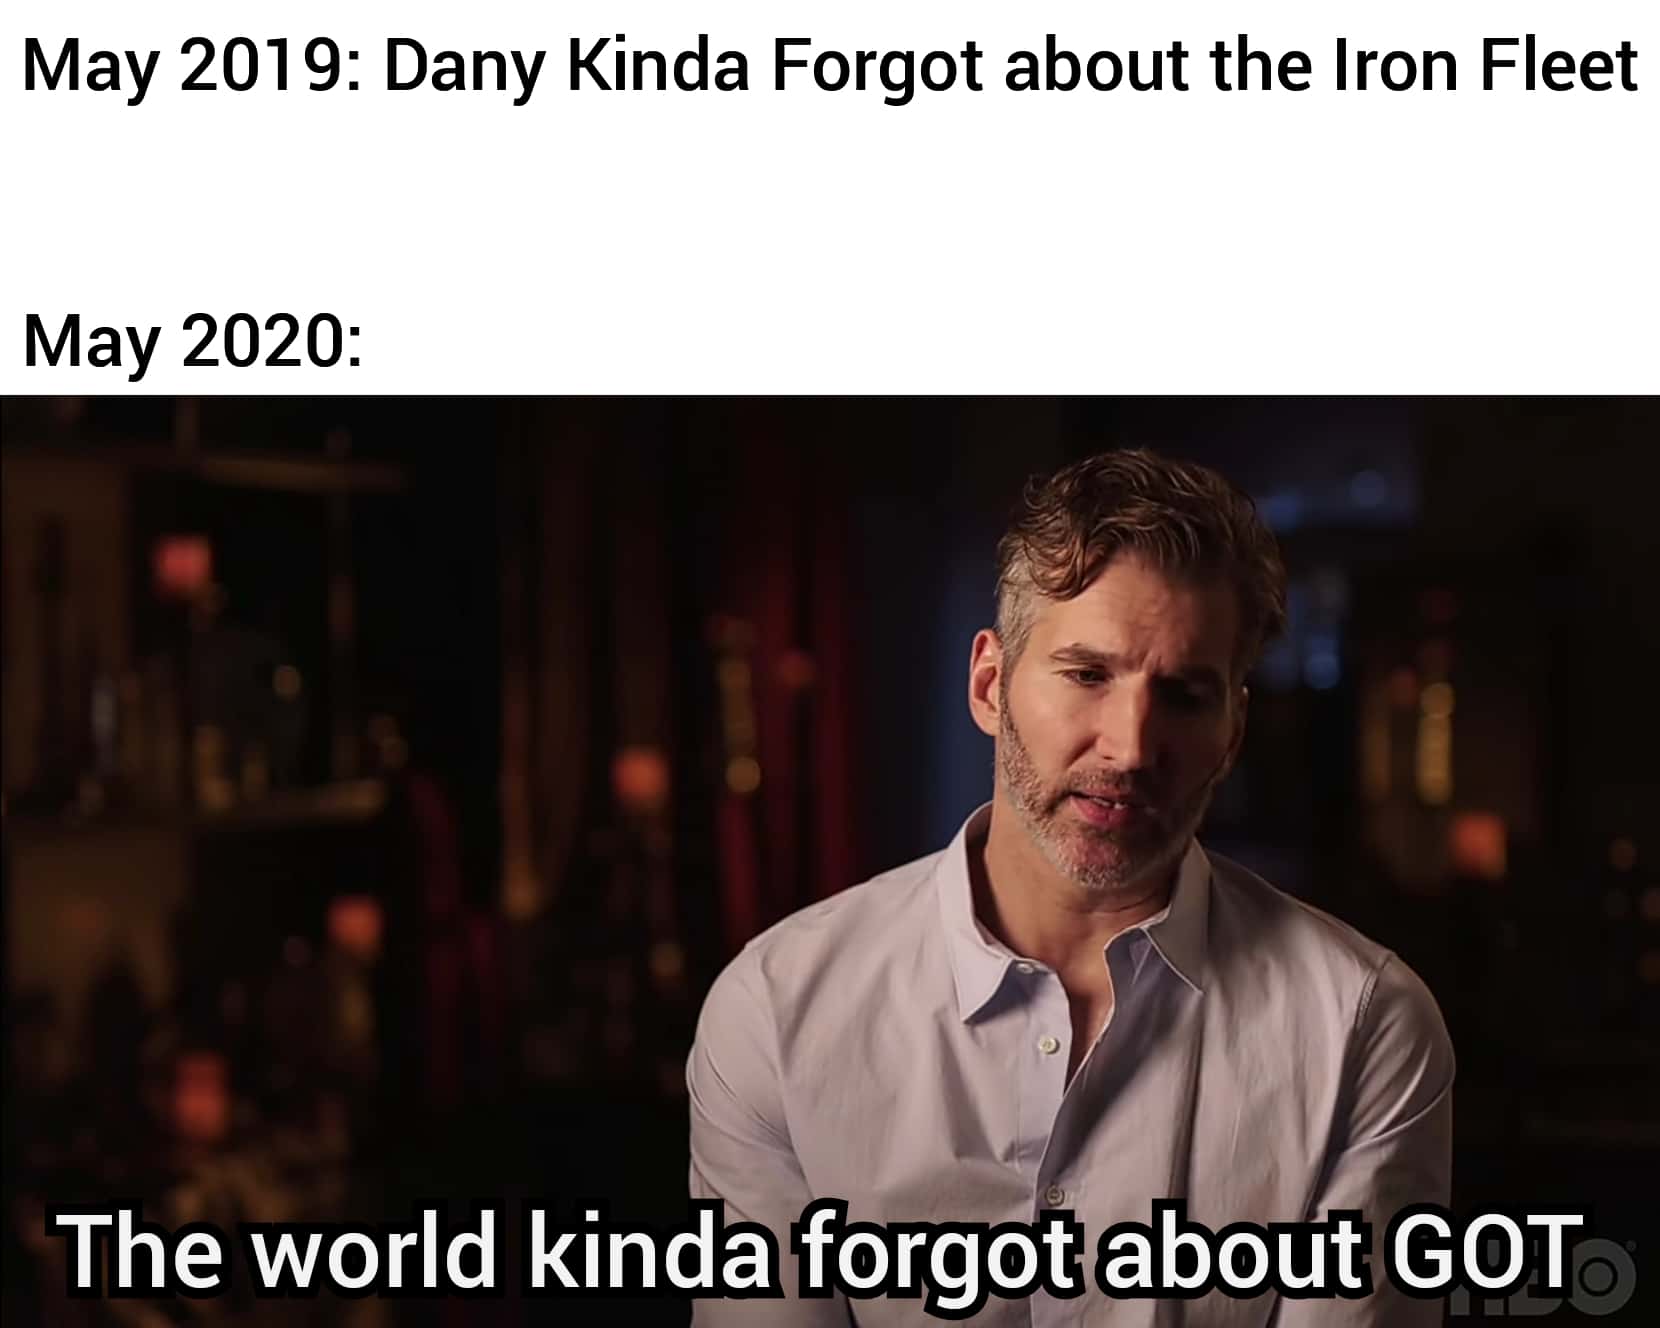 D-n-d, GoT, GOT, Thrones, Game, Dany Game of thrones memes D-n-d, GoT, GOT, Thrones, Game, Dany text: May 201 9: Dany Kinda Forgot about the Iron Fleet May 2020: The world kinda fgqgot aboy@GOT 